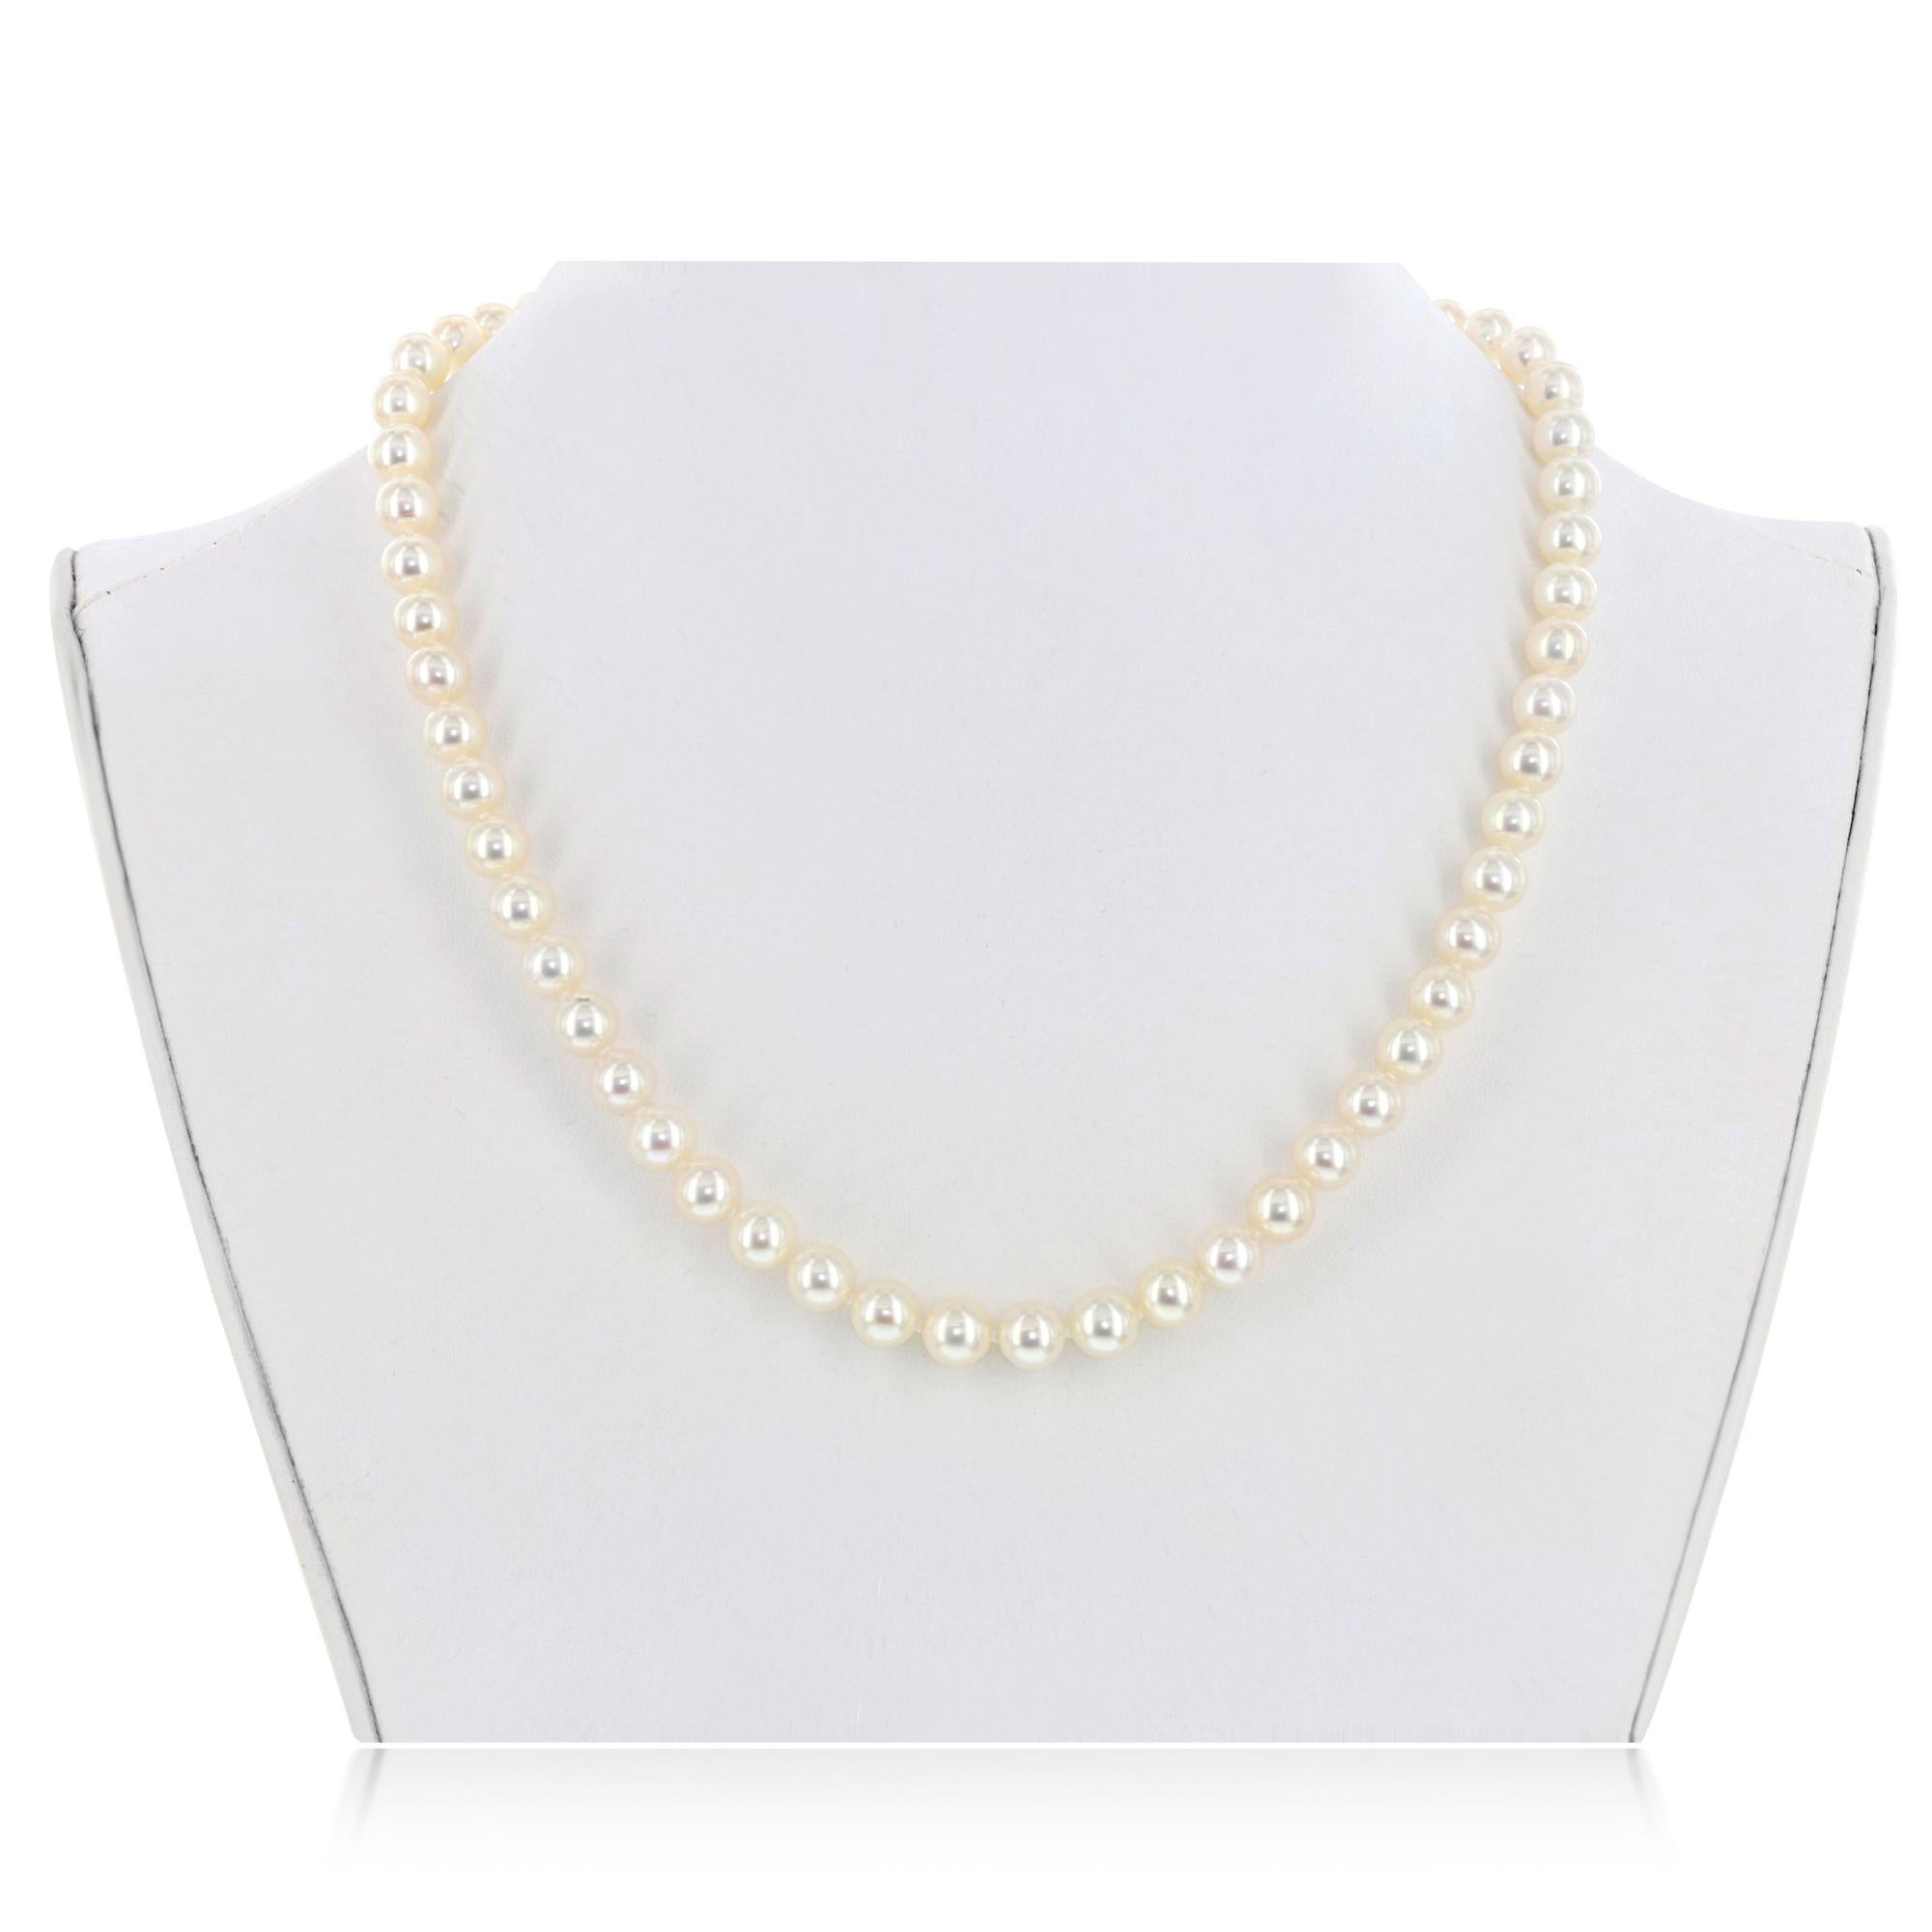 This exquisite Japanese Akoya cultured pearl necklace features distinctive, lustrous, natural color round pearls measuring 9-9.5mm. This necklace is strung with a textured 14 karat yellow gold 10mm ball clasp. 
This necklace makes the perfect